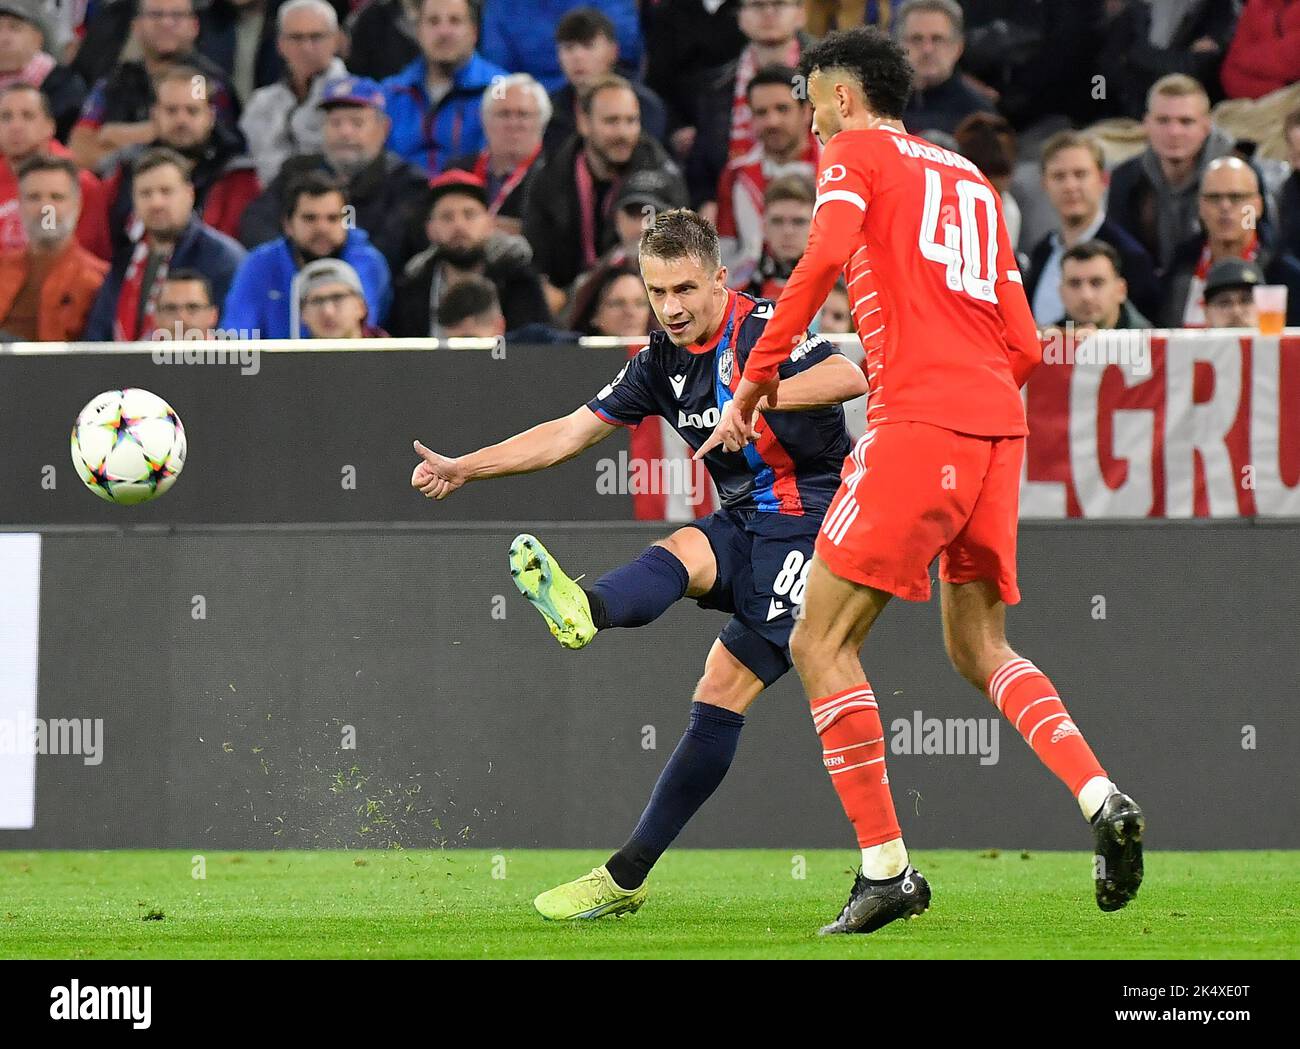 Munich, Germany. 04th Oct, 2022. Adam Vlkanova of Plzen, left, and Noussair Mazravi of Bayern in action during the Champions League, 3rd round, Group C match Bayern Munich vs Viktoria Plzen in Munich, Germany, October 4, 2022. Credit: Miroslav Chaloupka/CTK Photo/Alamy Live News Stock Photo